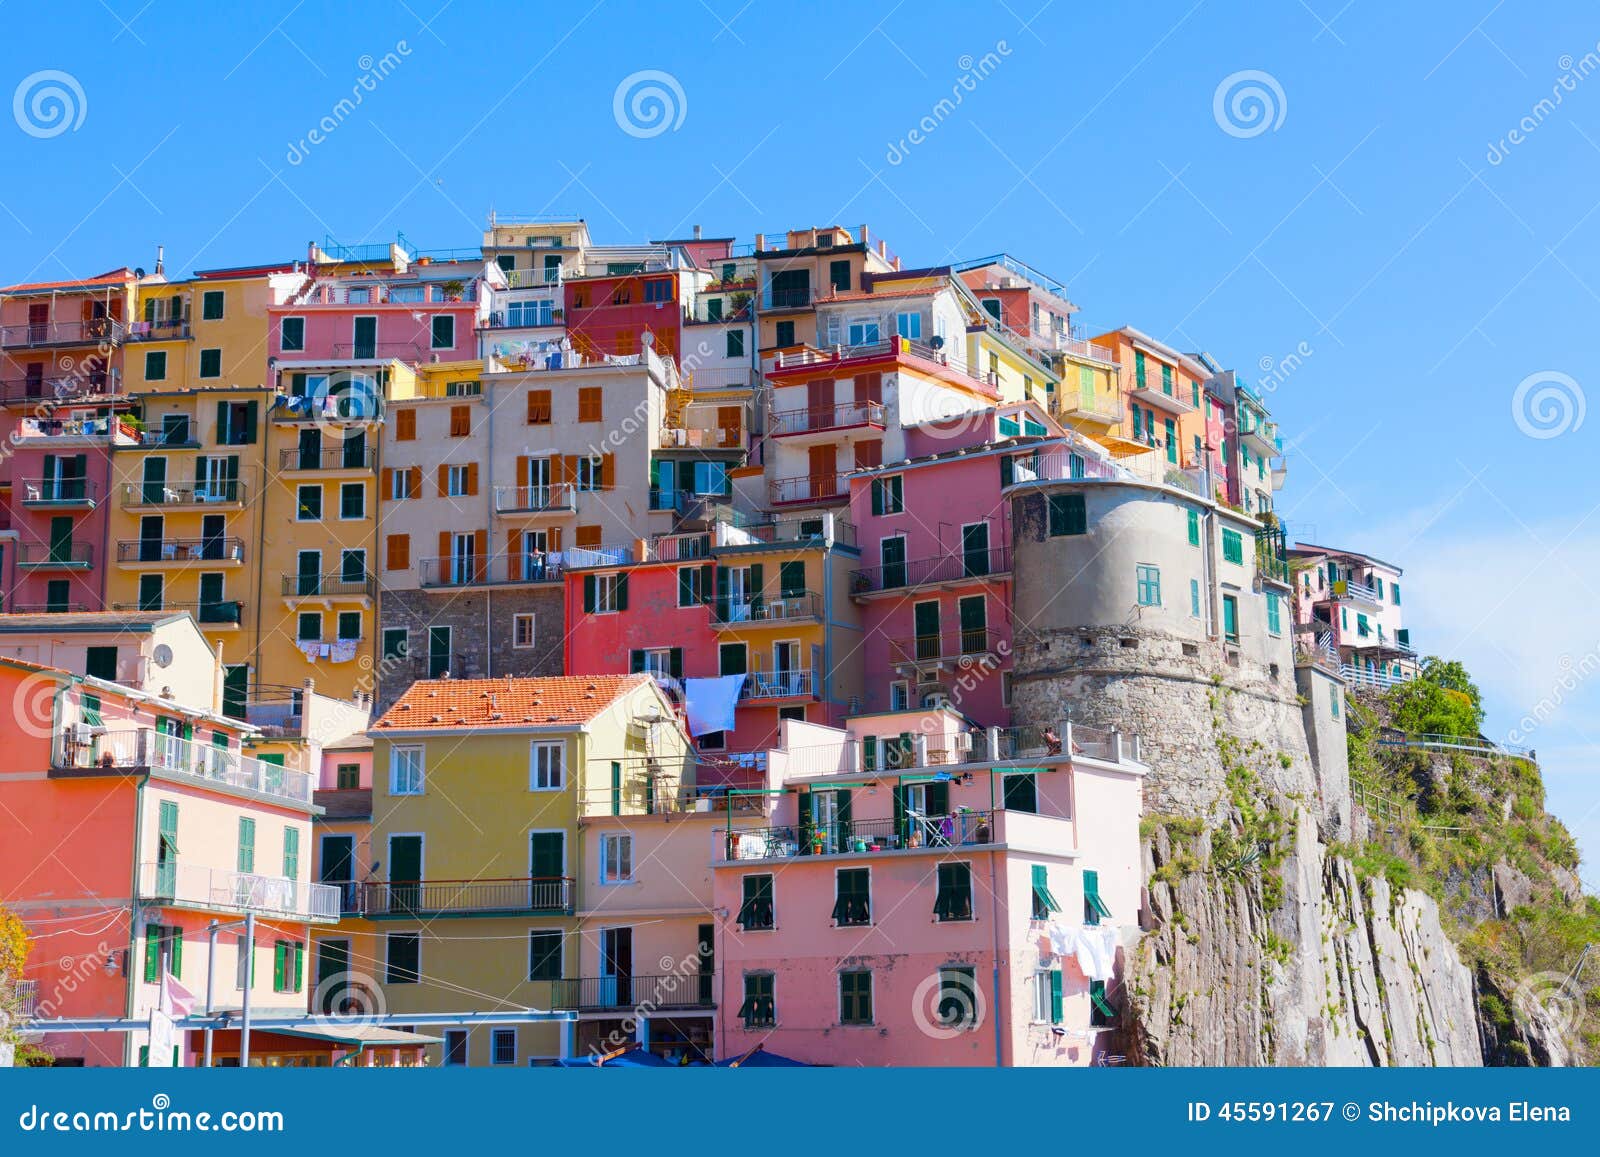 Multi-colored Houses in Manarol S Fishing Small Village Stock Image ...